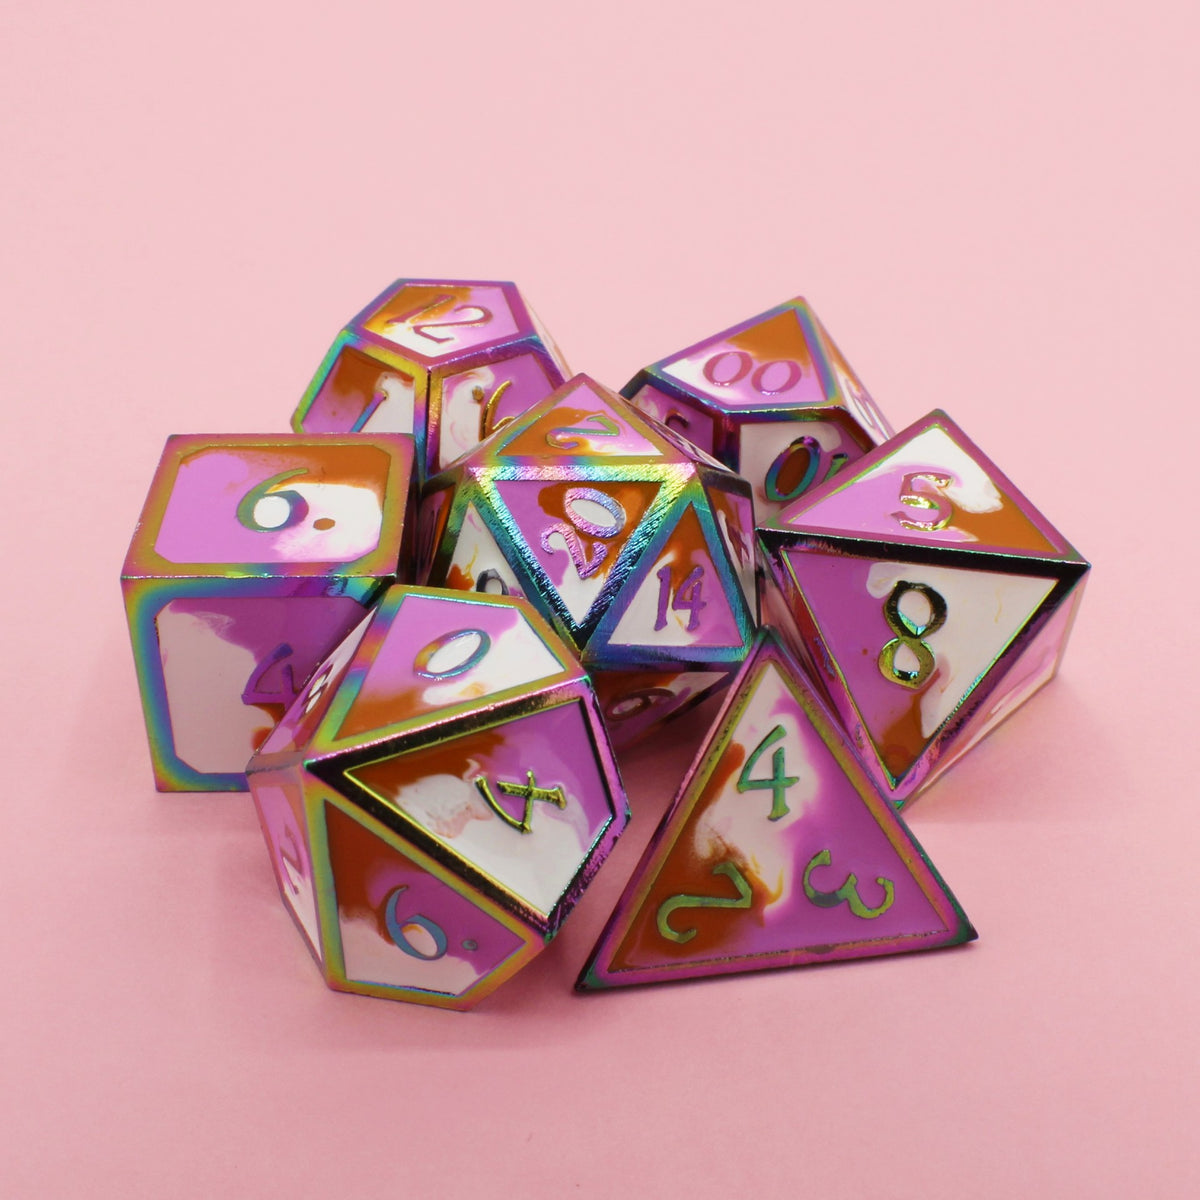 Pink Orange and White with Rainbow Framed Metal Dice Set!